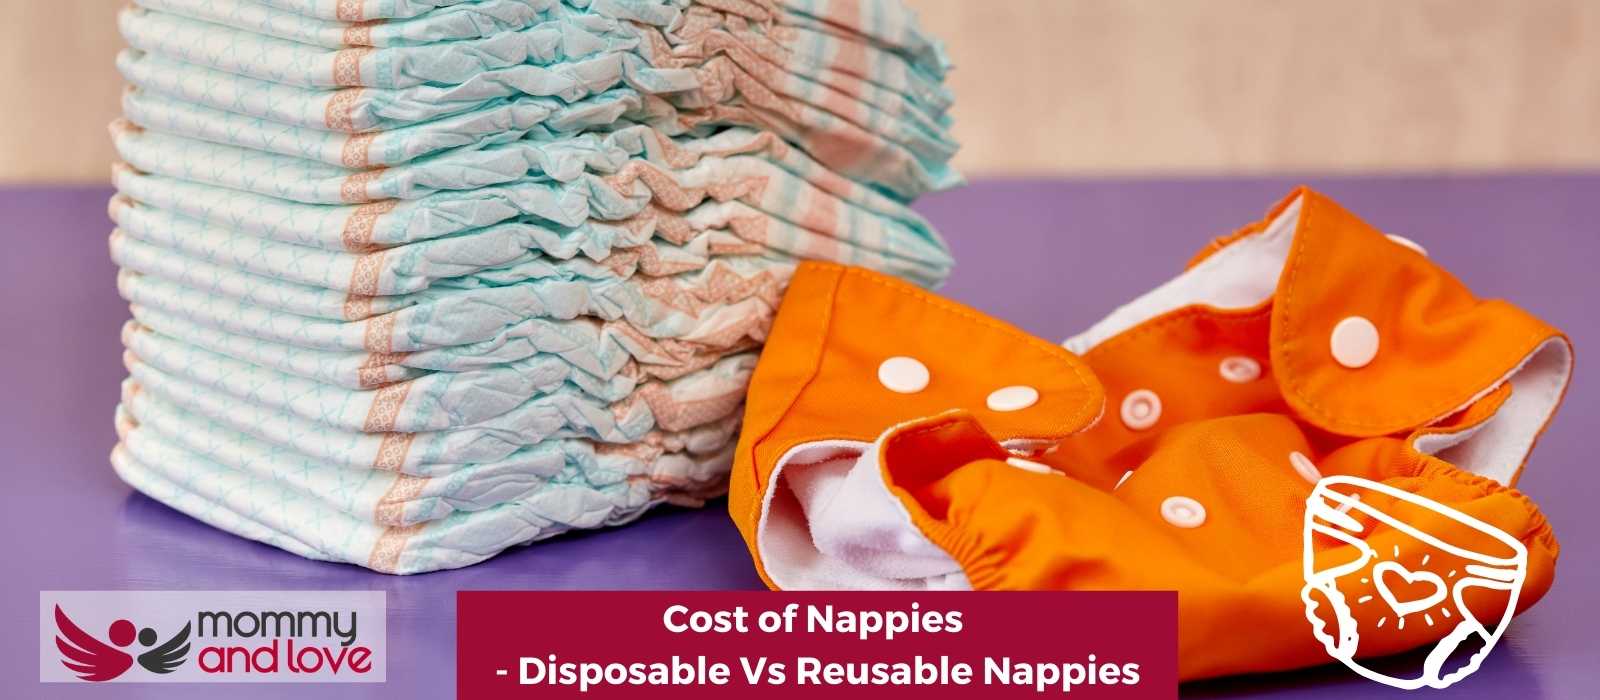 Cost of Nappies - Disposable Vs Reusable Nappies